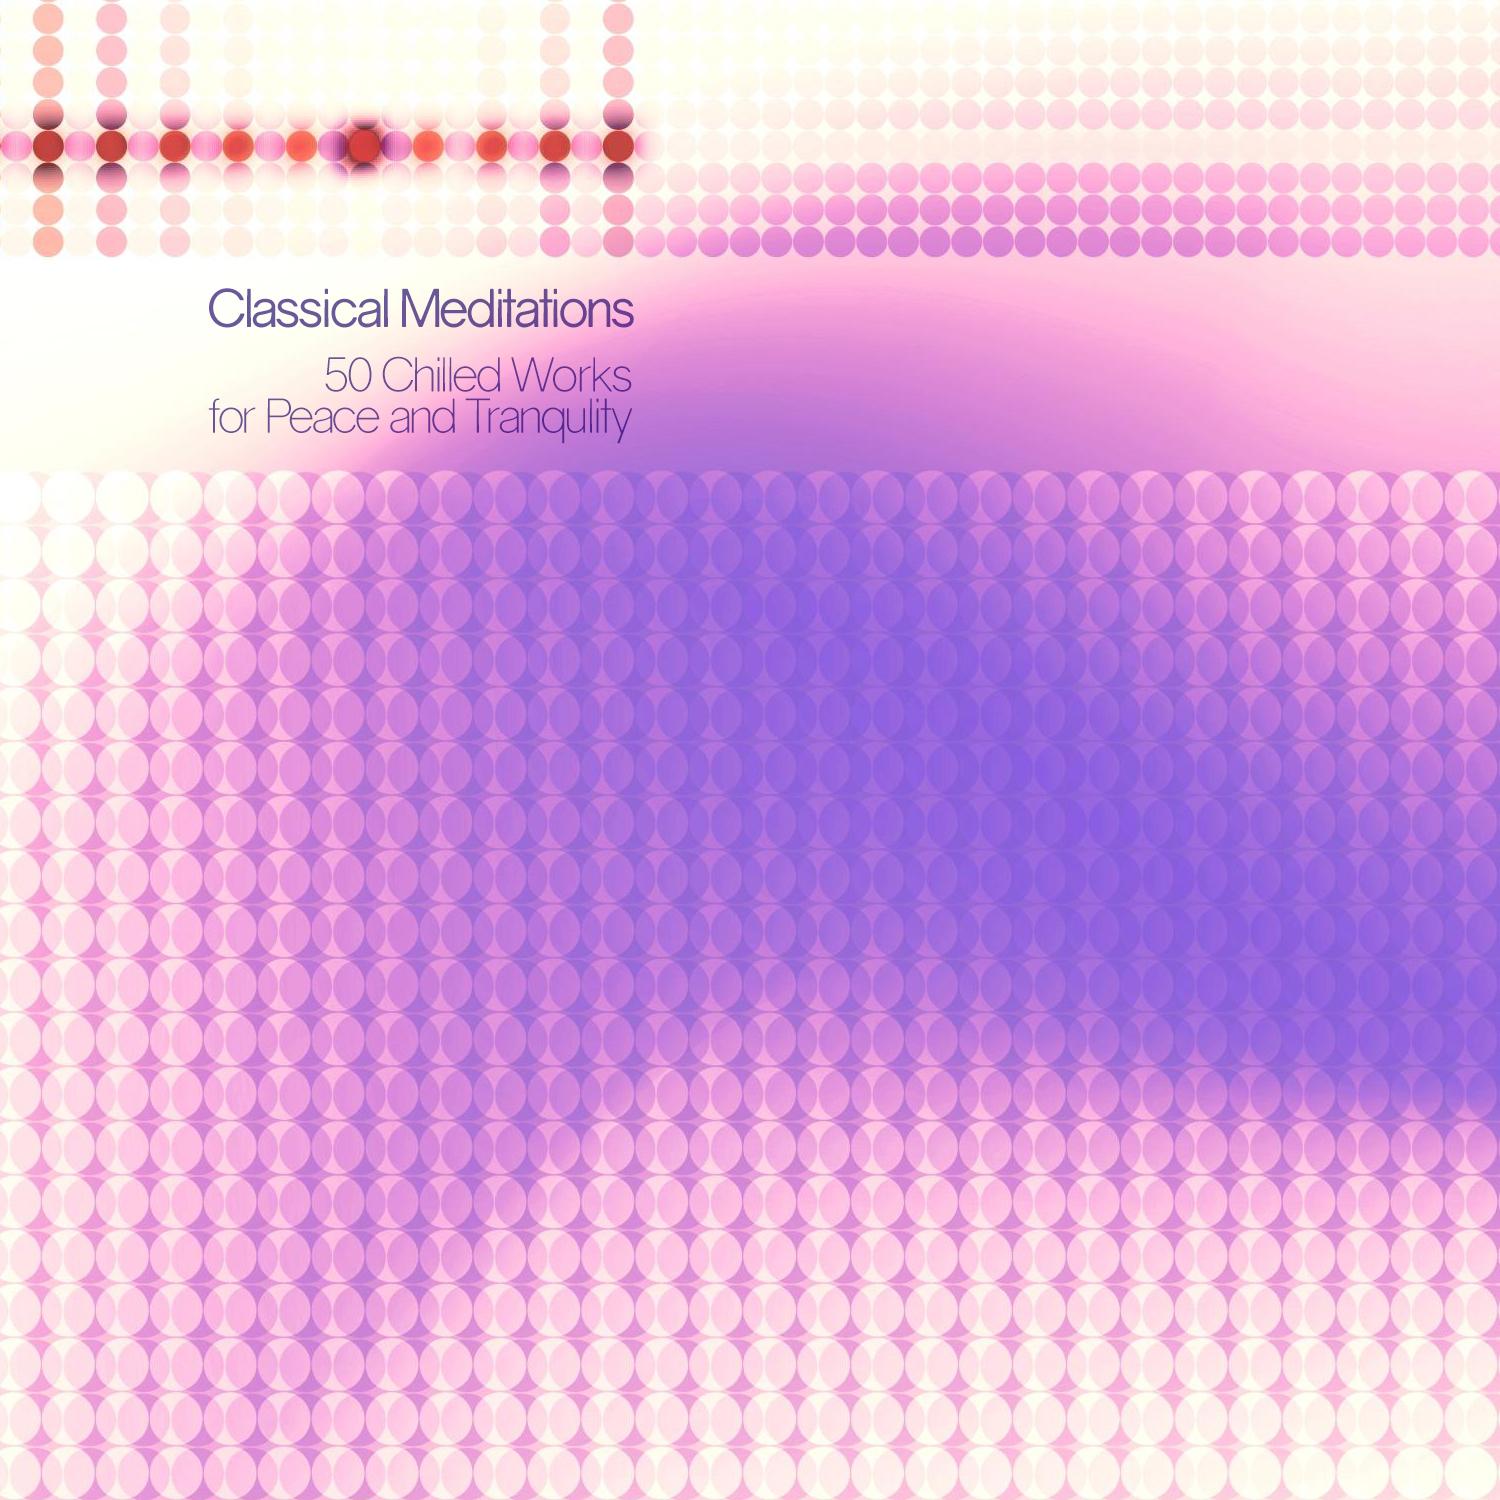 Classical Meditations - 50 Chilled Works for Peace and Tranqulity